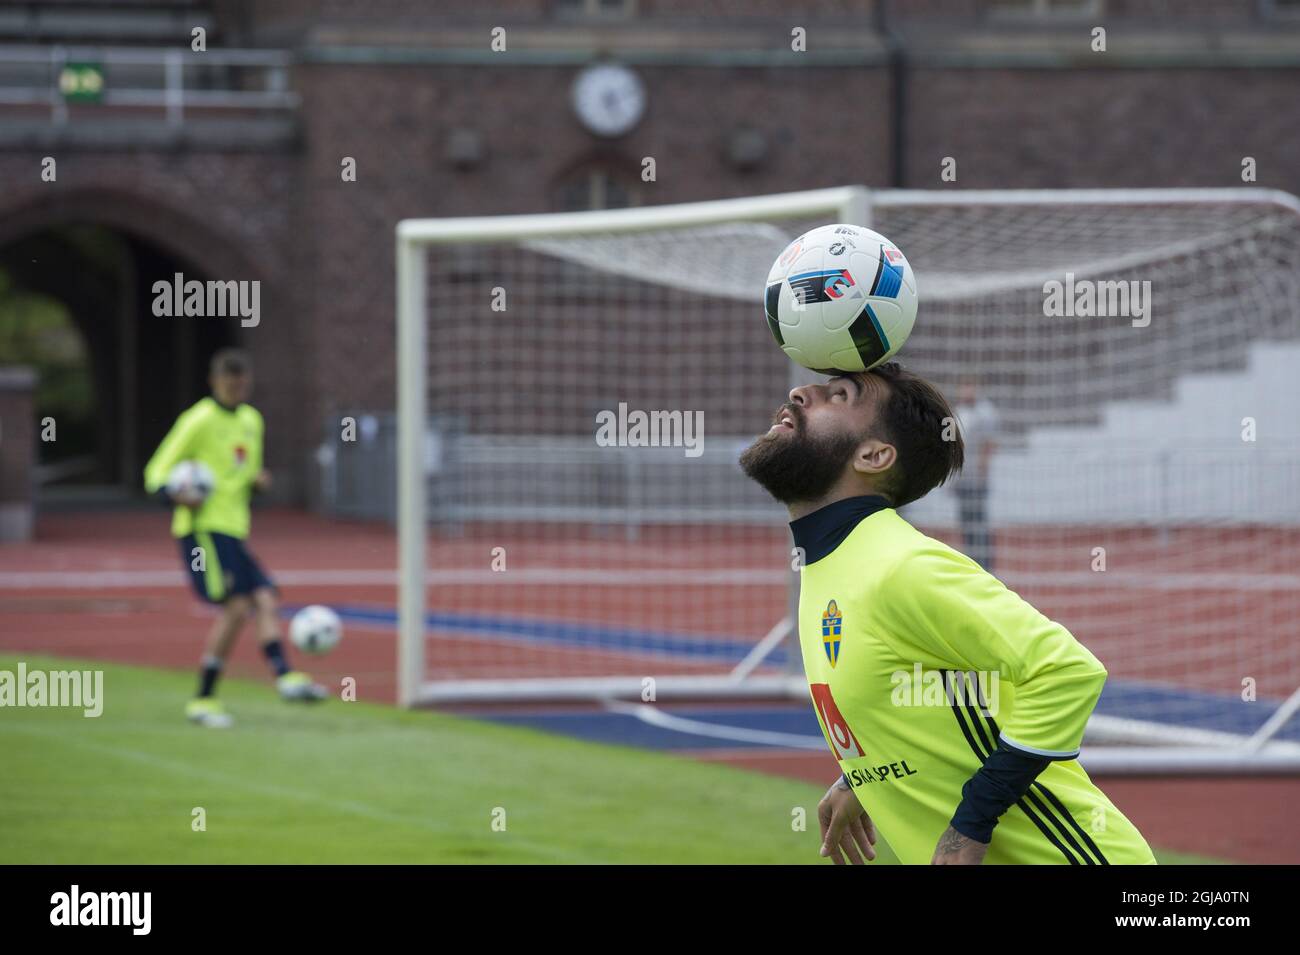 STOCKHOLM 2016-05-28 Jimmy Durmaz pictured during the Swedish national football team Euro 2016 training camp at the Stockholm Olympic Stadium in Stockholm, Sweden, May 28, 2016. Photo: Erik Nylander / TT / kod 11540 ** SWEDEN OUT ** Stock Photo